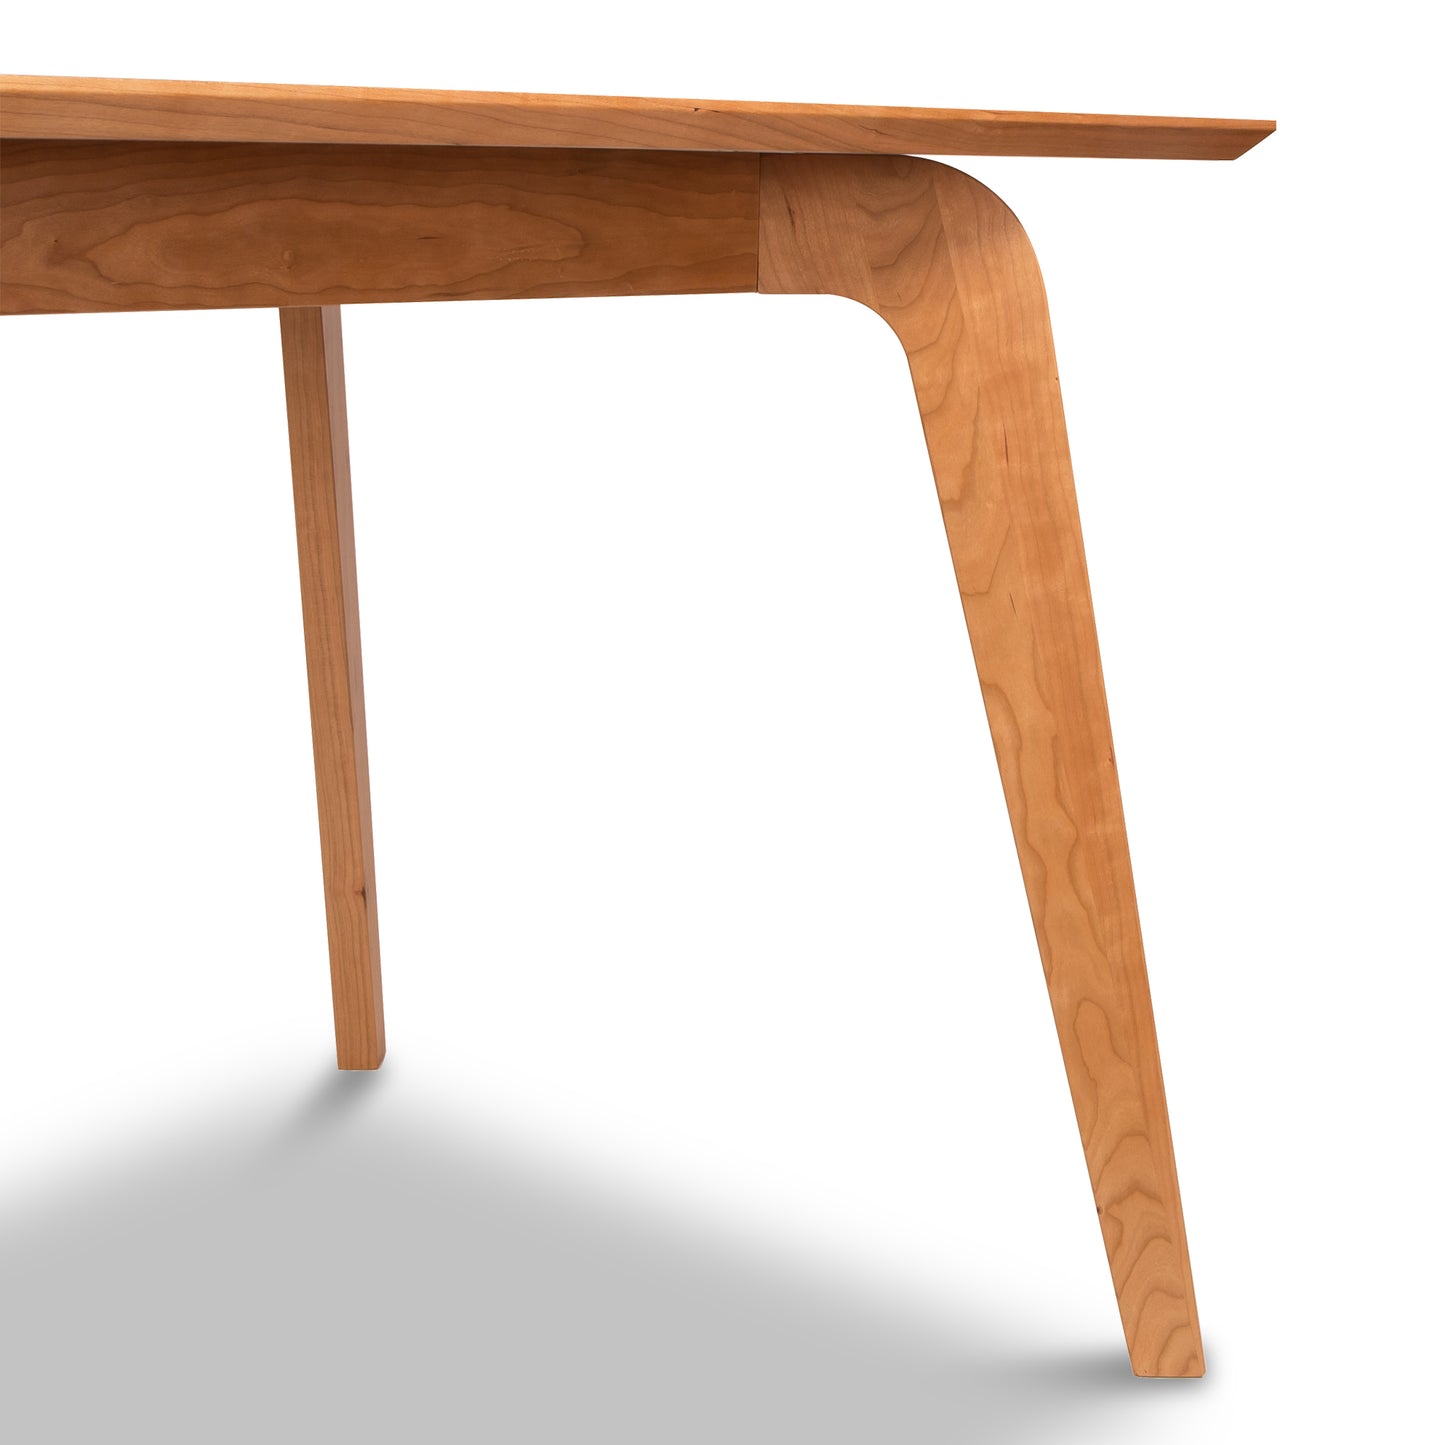 The Brighton Solid-Top Table - Floor Model by Lyndon Furniture is a beautiful addition to any mid-century modern home. With its solid wood construction and wooden leg, this table exudes both quality and style.